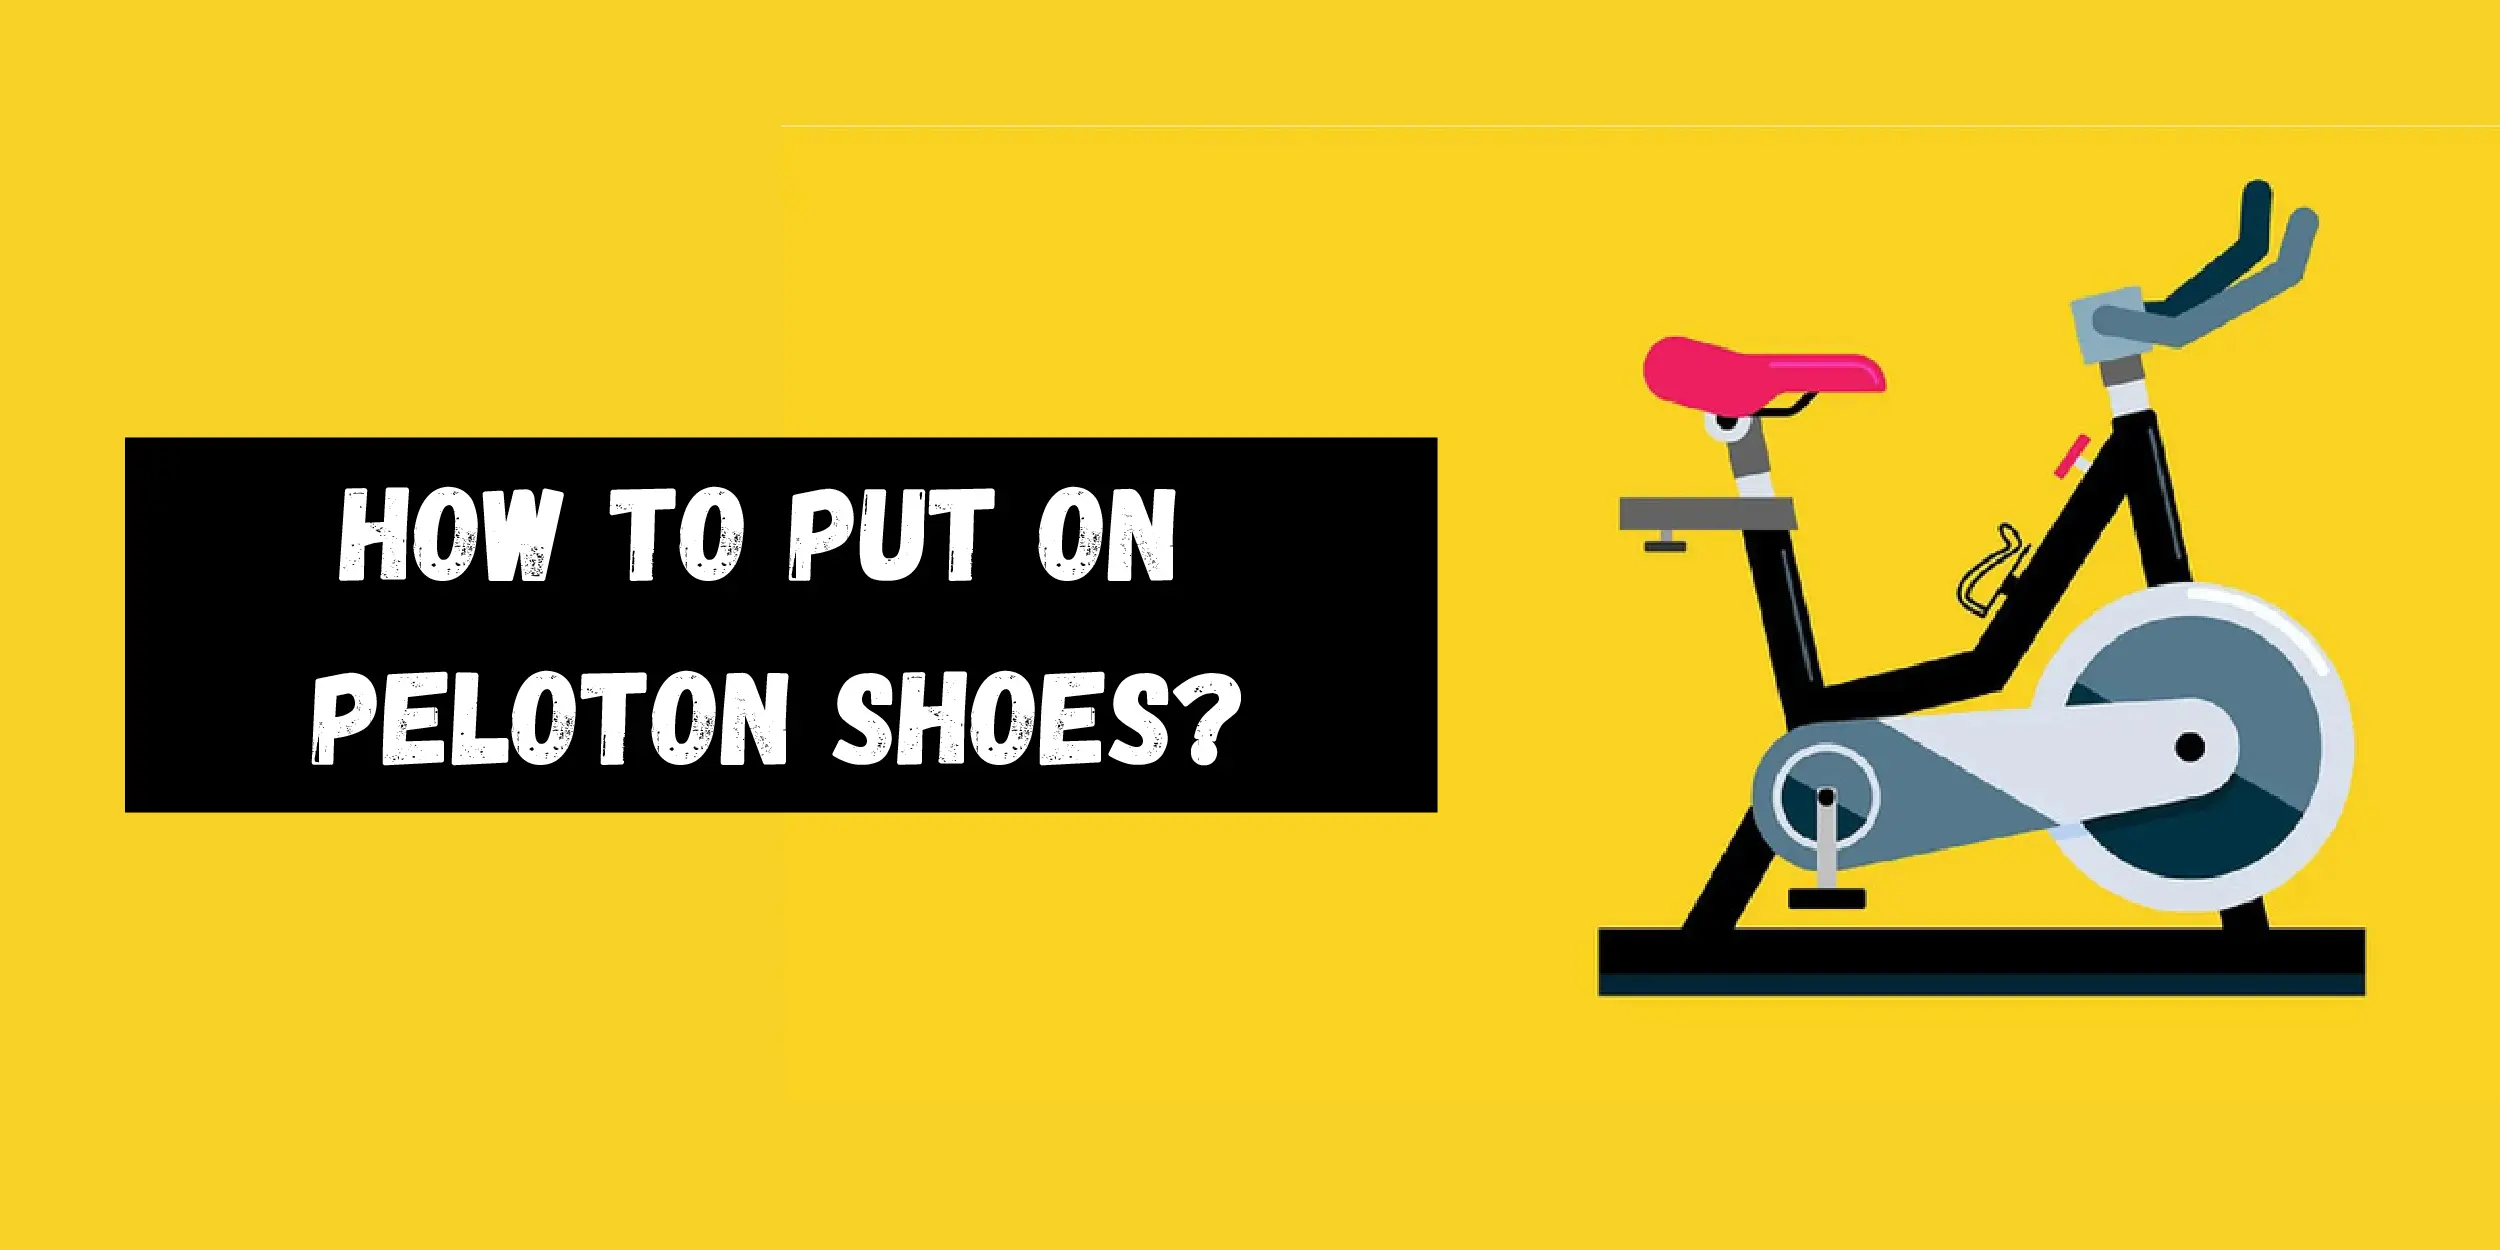 How to Put on Peloton Shoes?